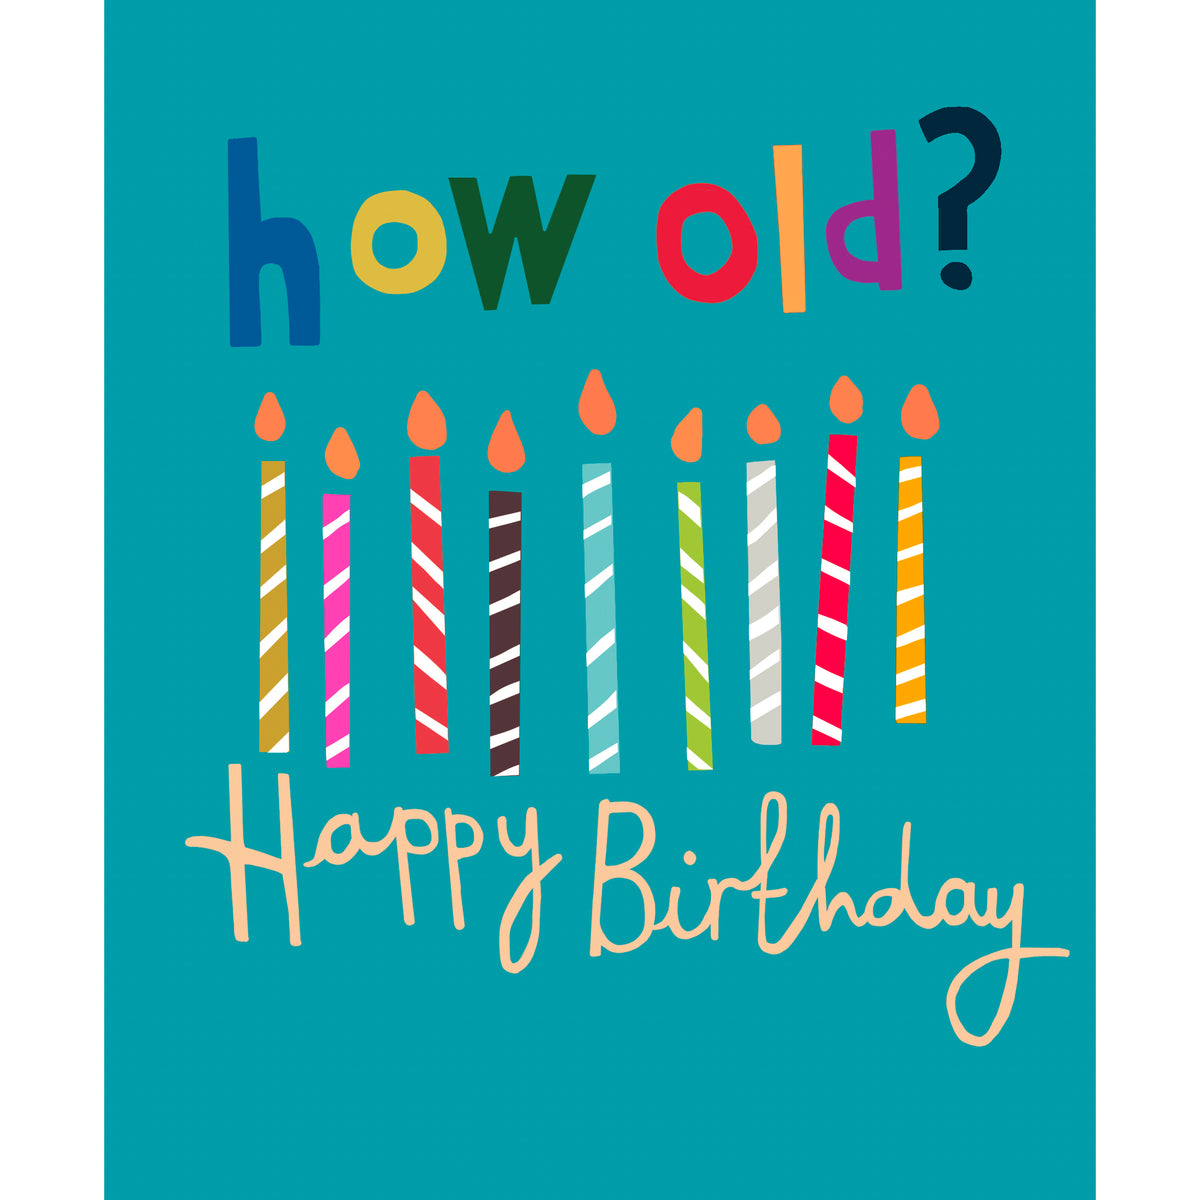 How Old? Candles Birthday Card from Penny Black